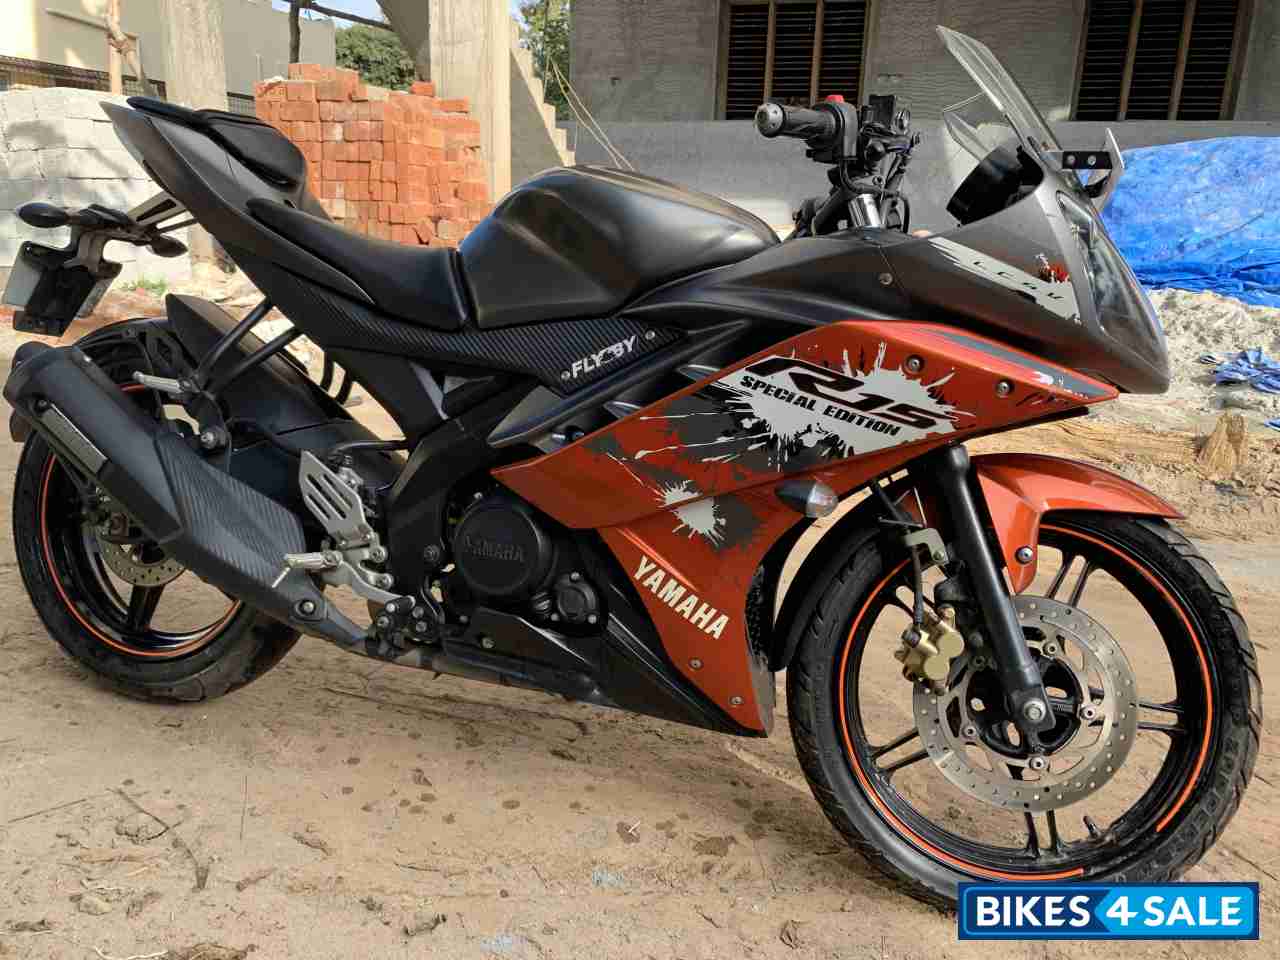 Used 2018 model Yamaha YZF R15 V2 for sale in Bangalore. ID 302174 ...